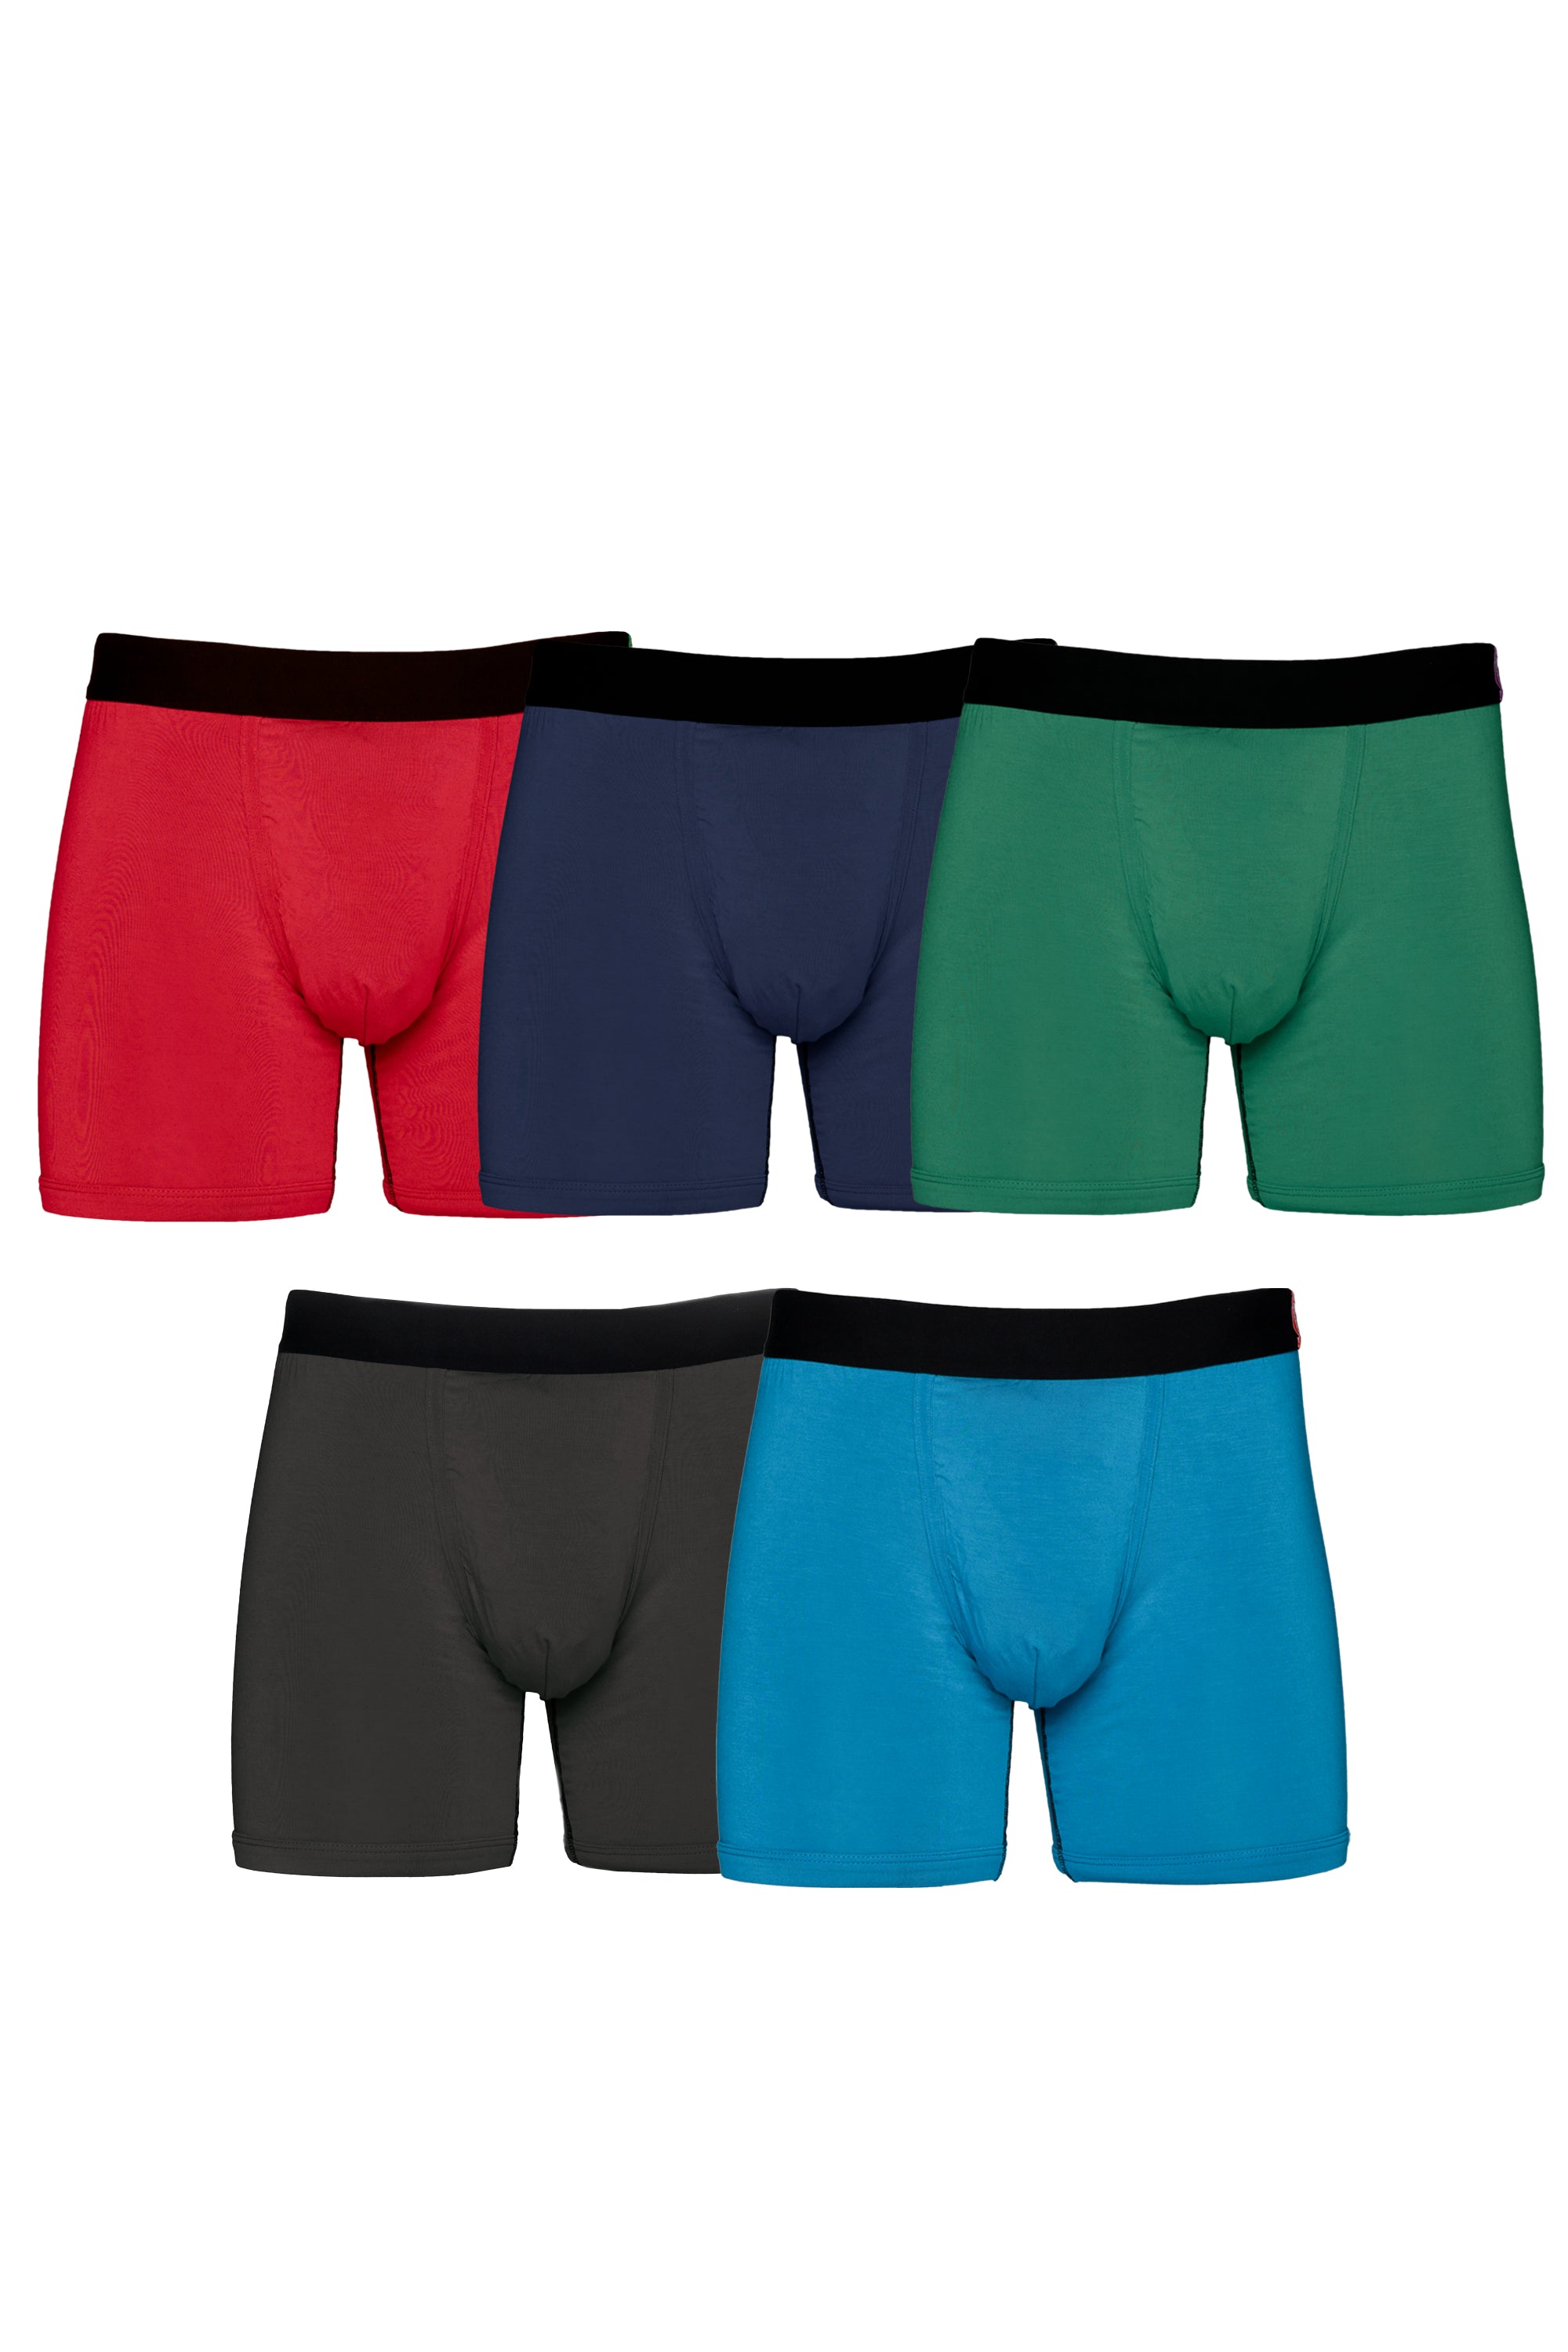 Solid Colored Boxers Briefs by Shinesty